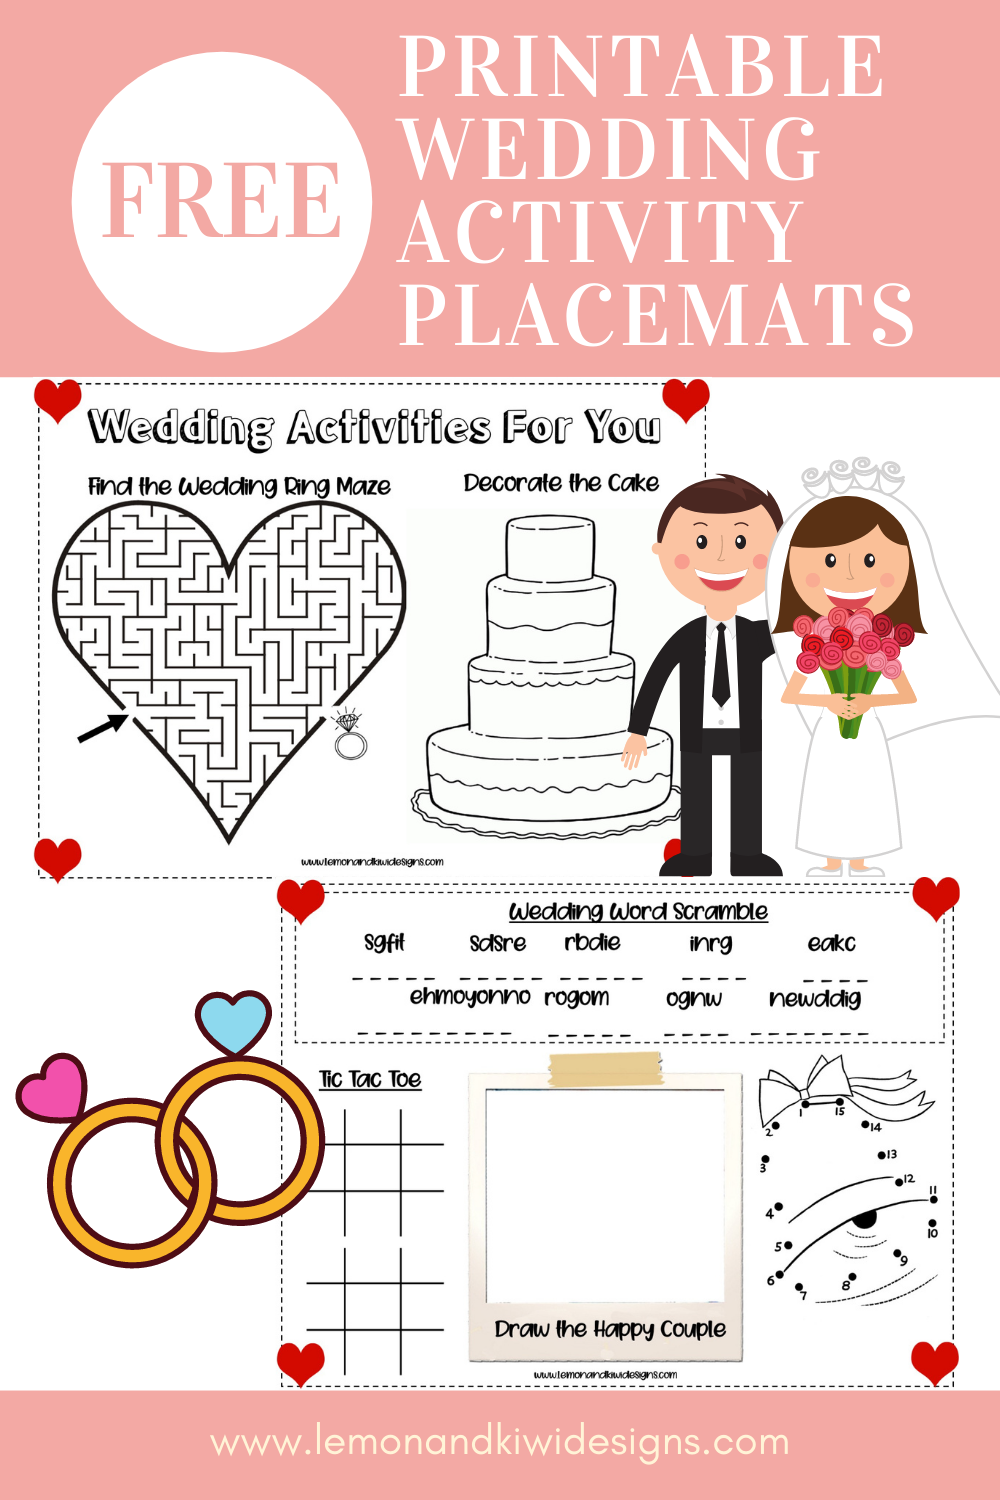 Free Printable Wedding Activity Placemats for Kids